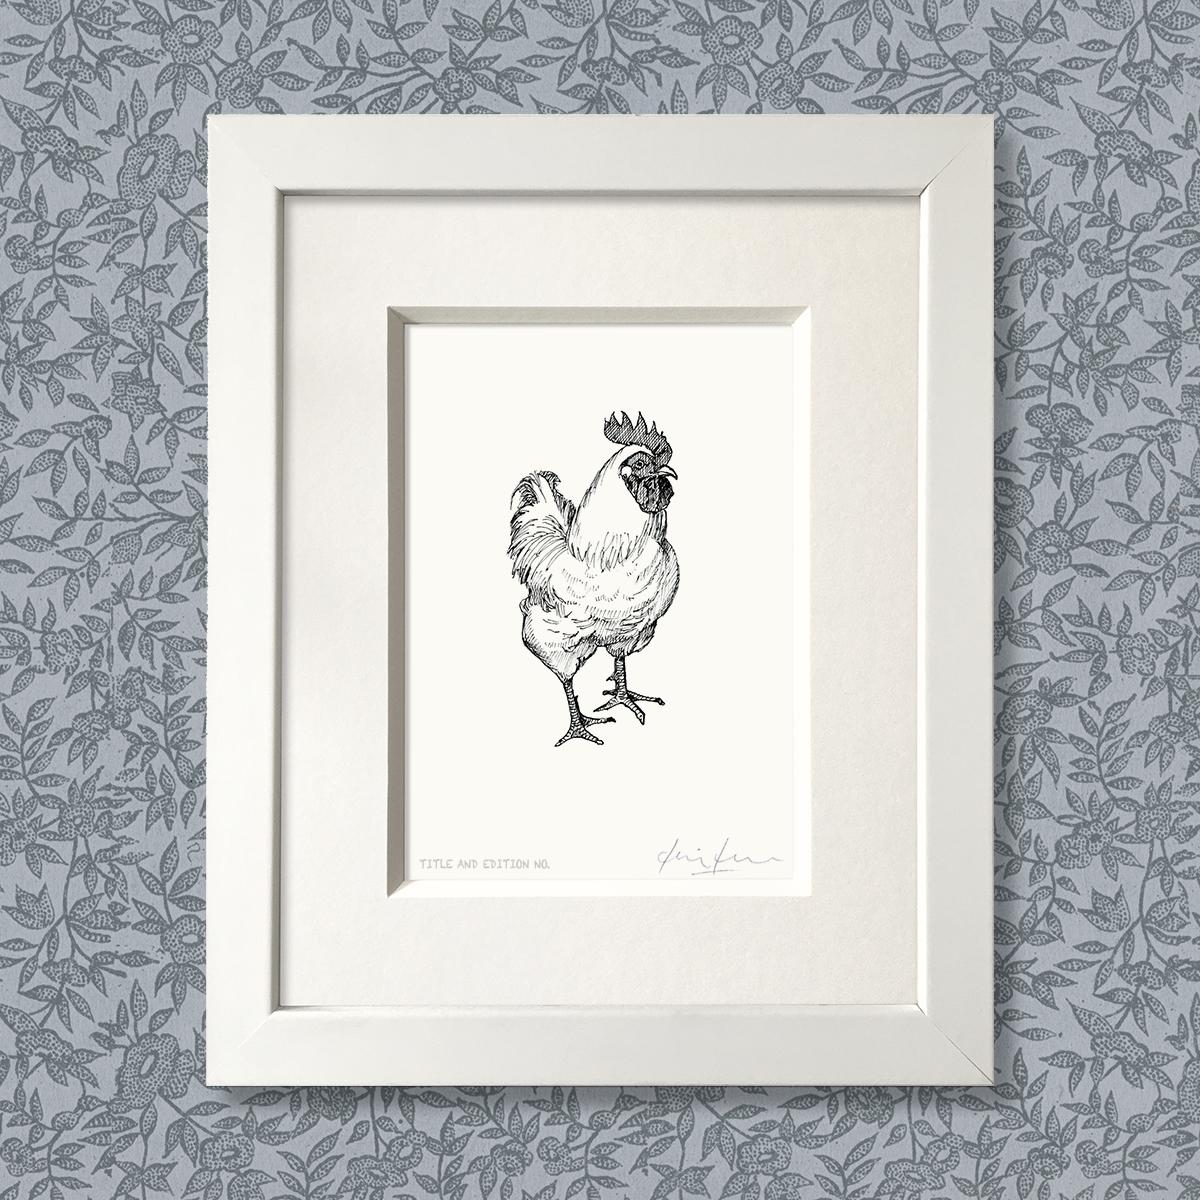 Limited edition print from pen and ink drawing of cockerel in white frame